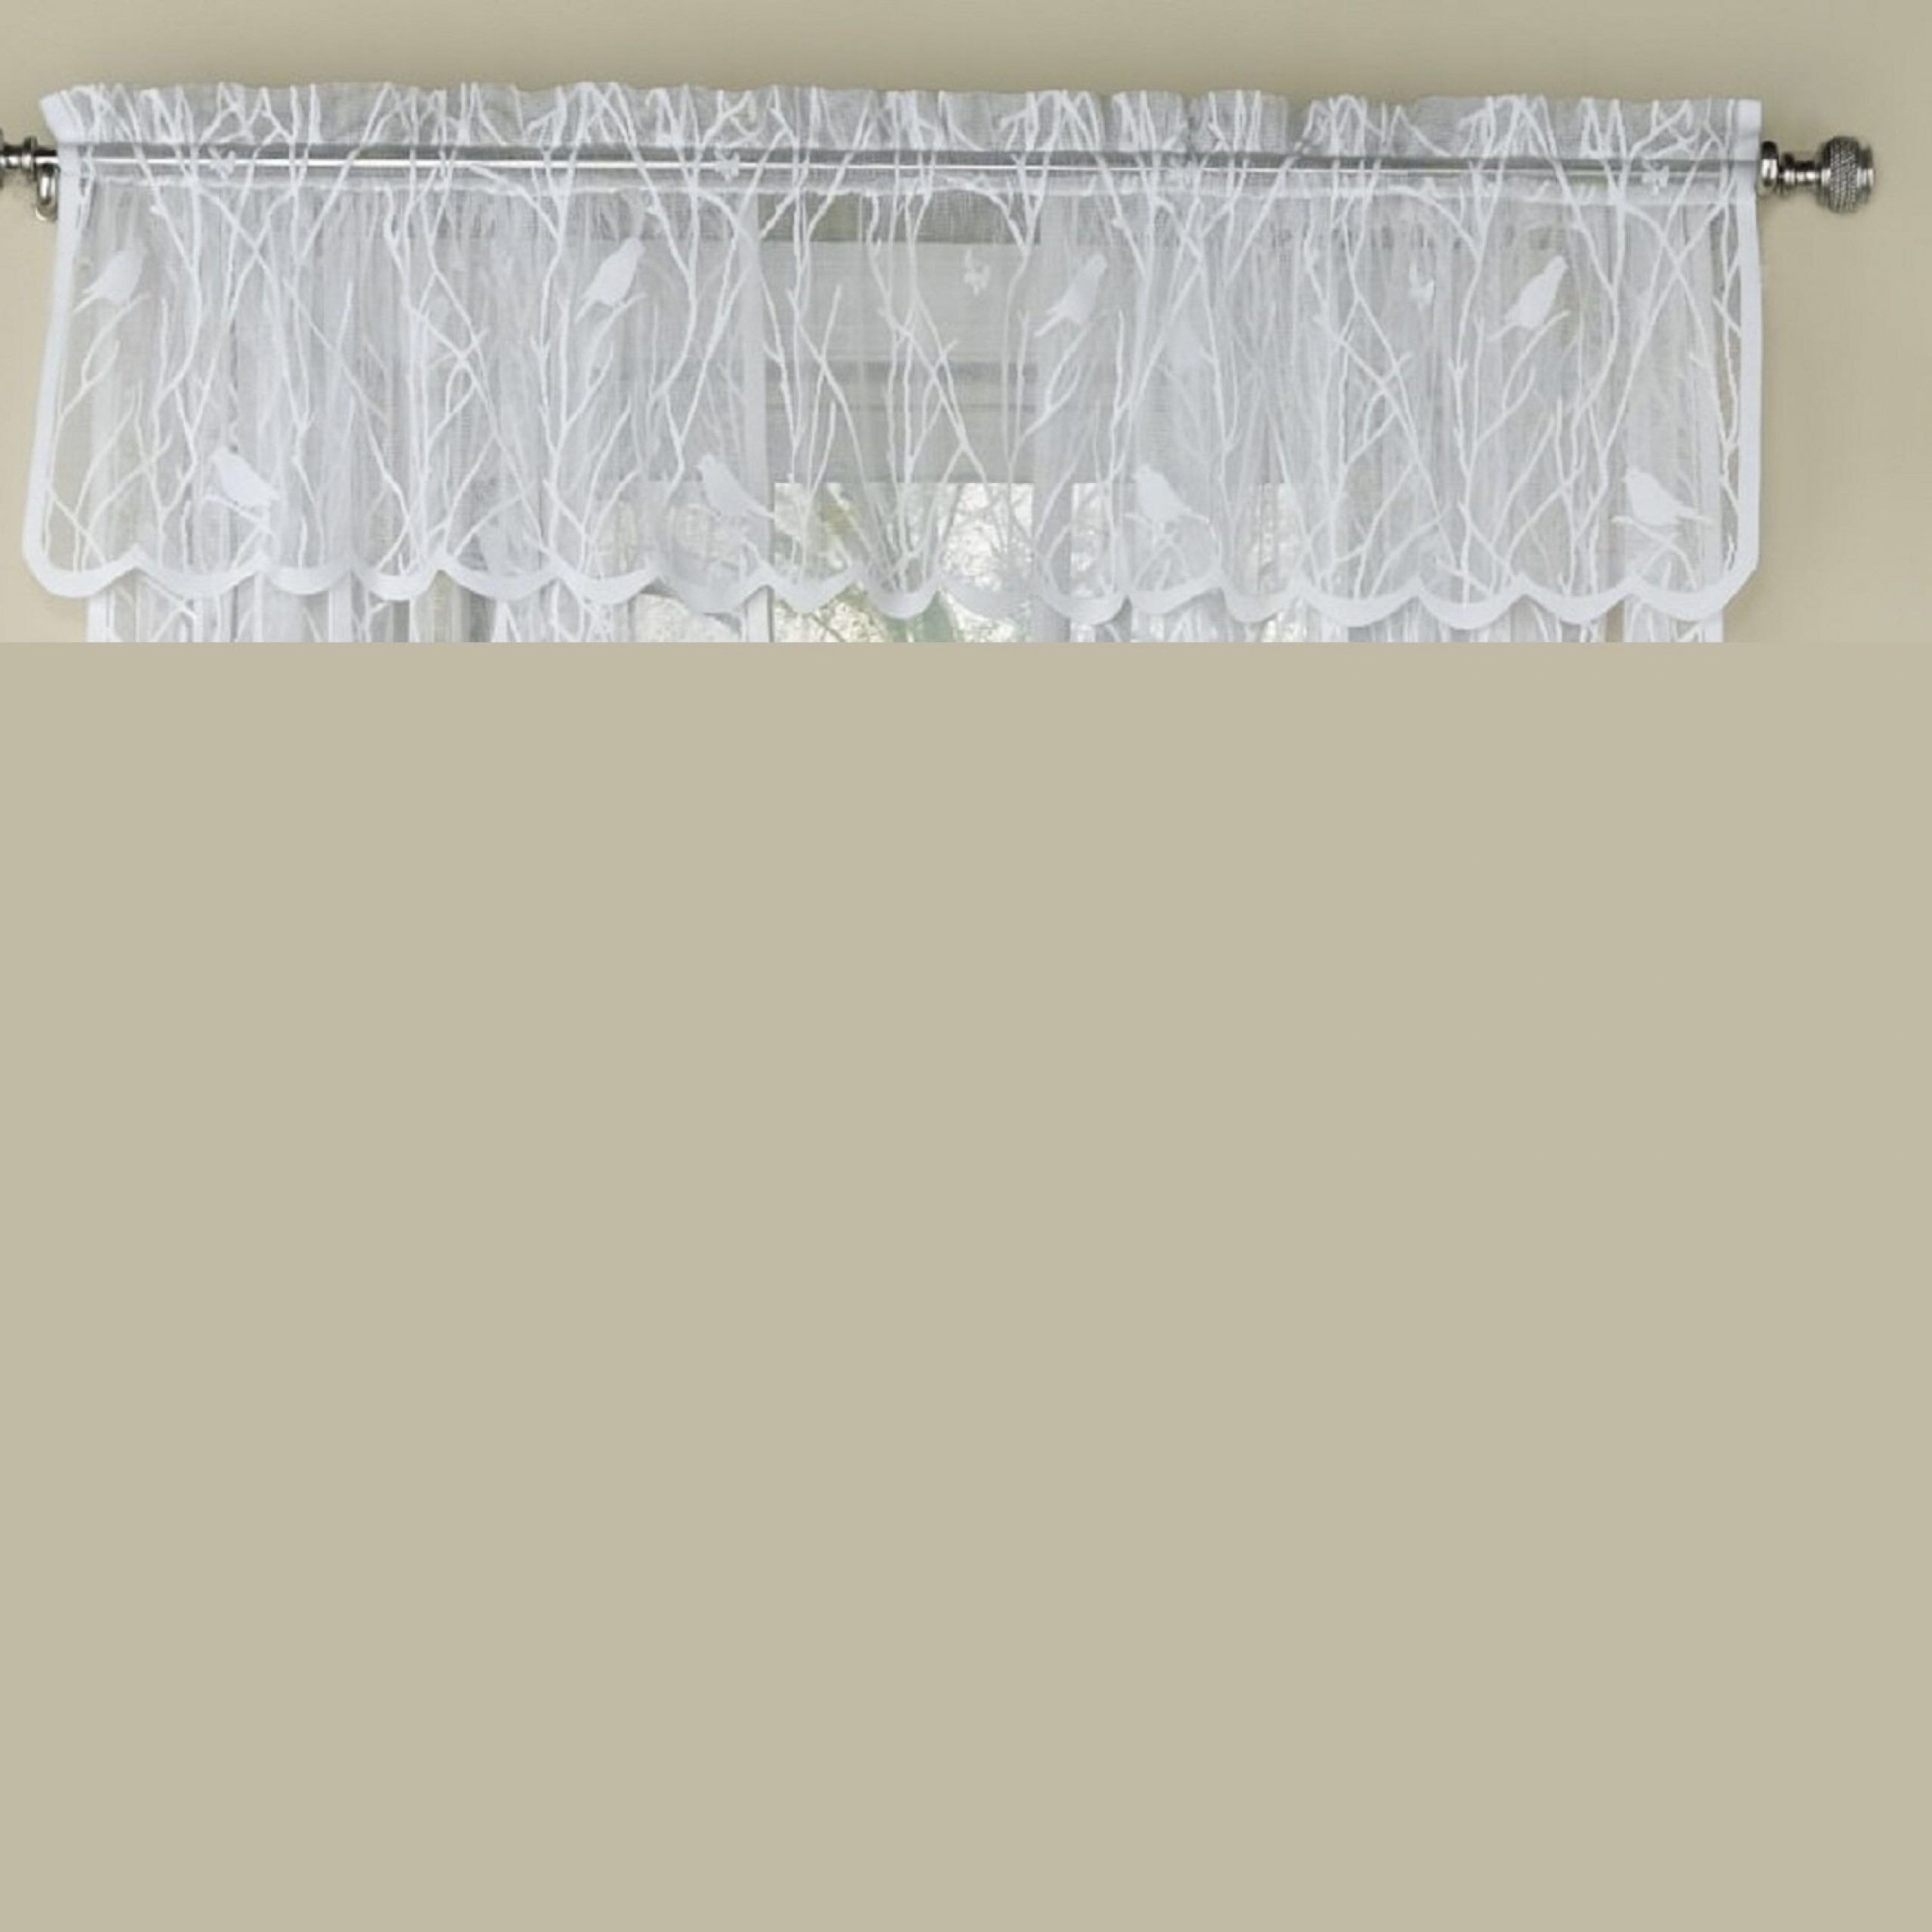 Prevatte Bird Song Sheer Lace Tailored 56" Window Valance Throughout White Knit Lace Bird Motif Window Curtain Tiers (View 15 of 20)